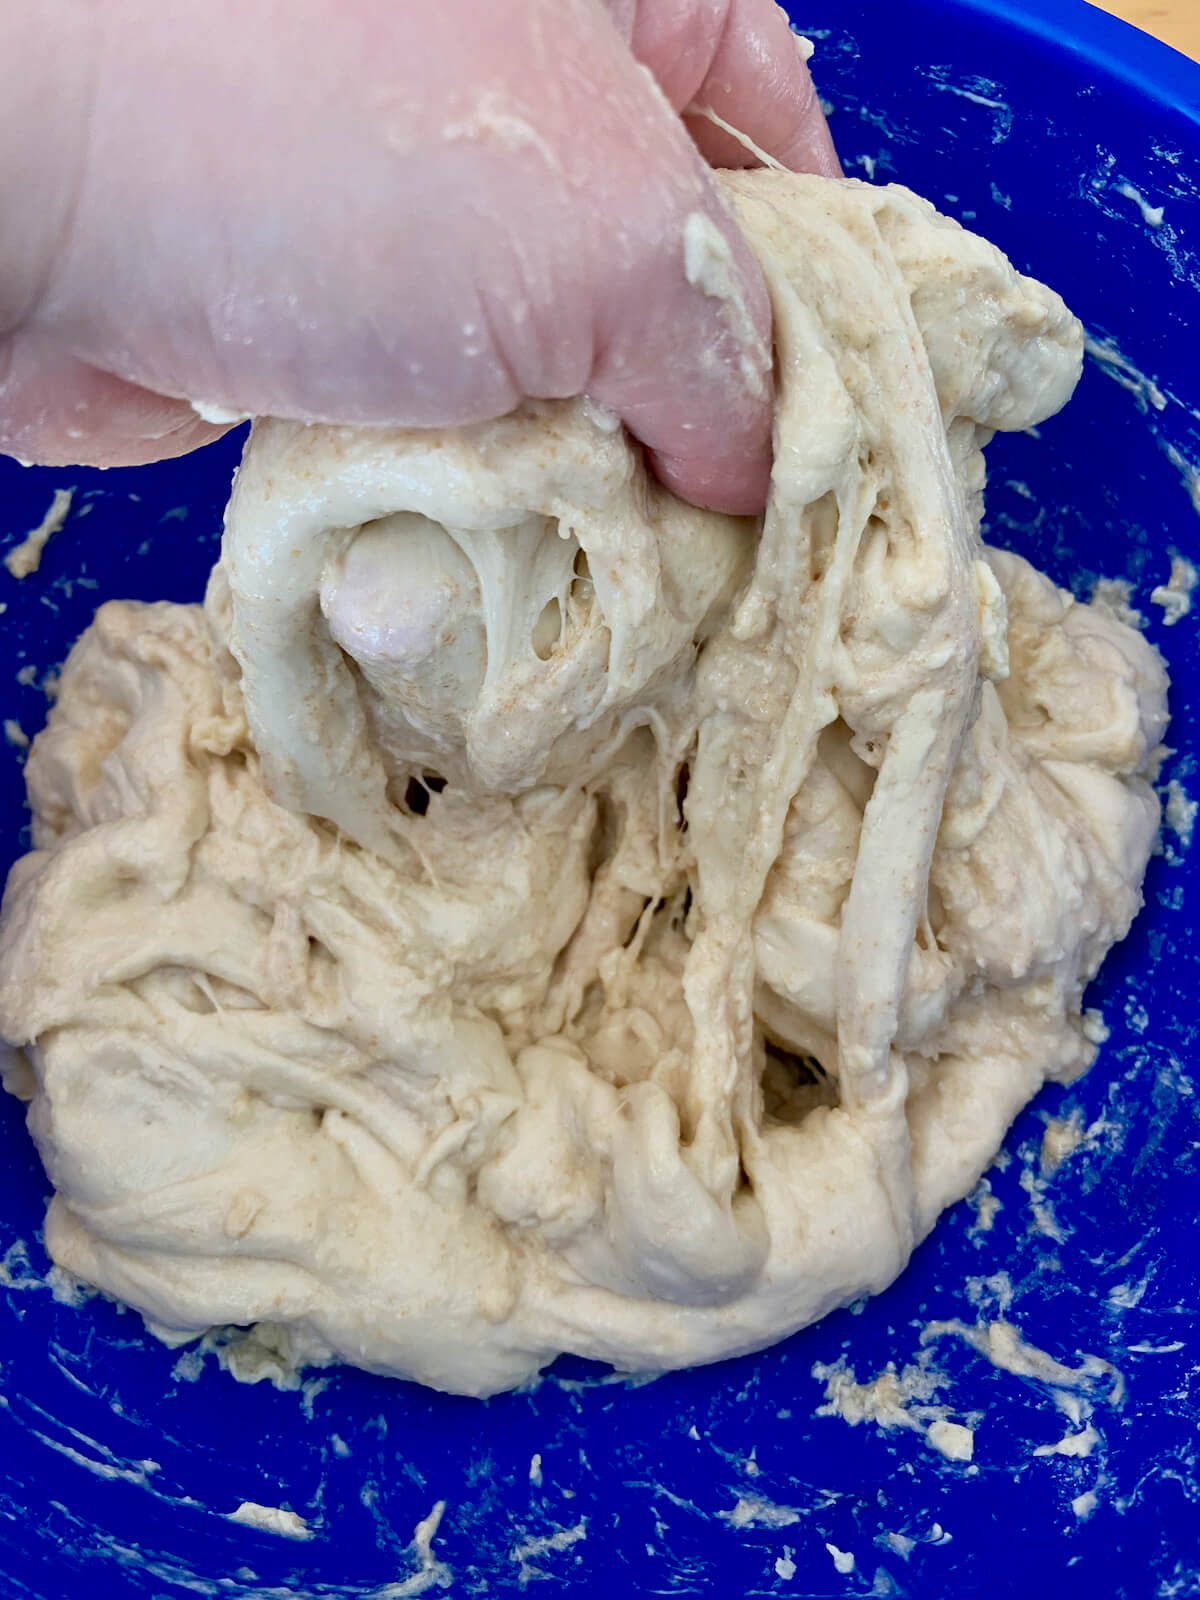 The dough during the mixing step. It is stringy and not well mixed together yet.